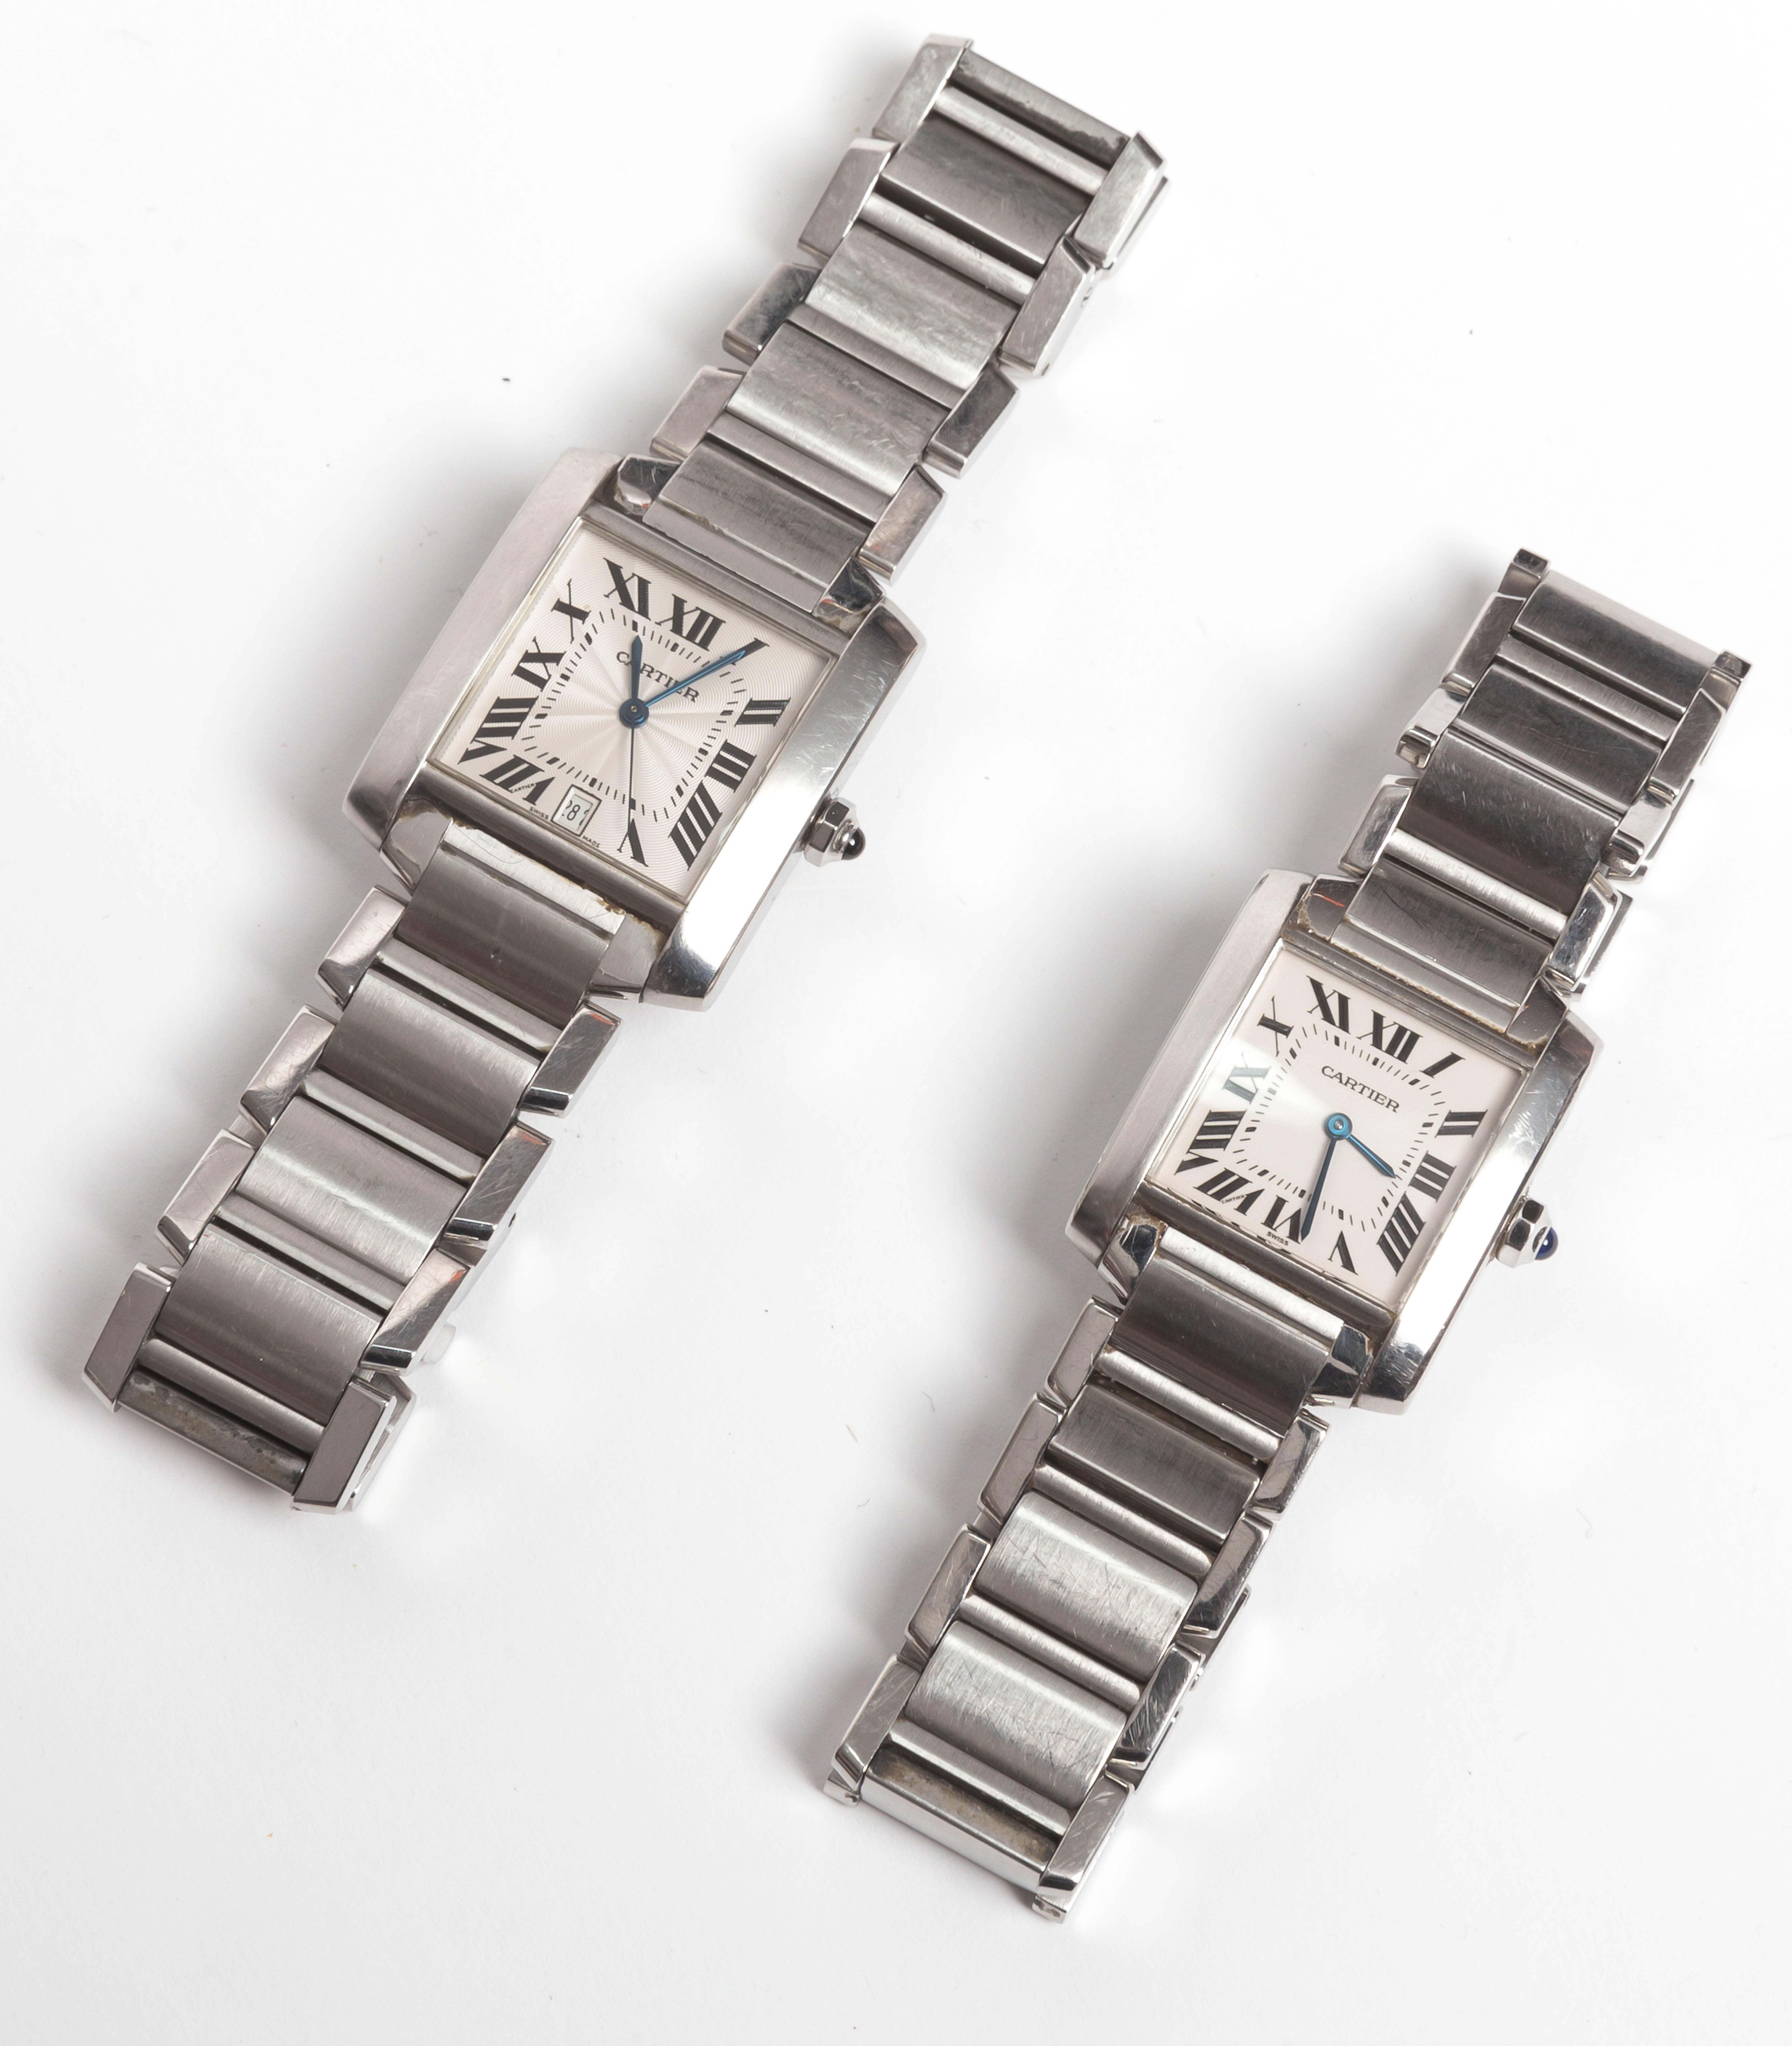 Cartier Tank Francaise in Stainless Steel 5